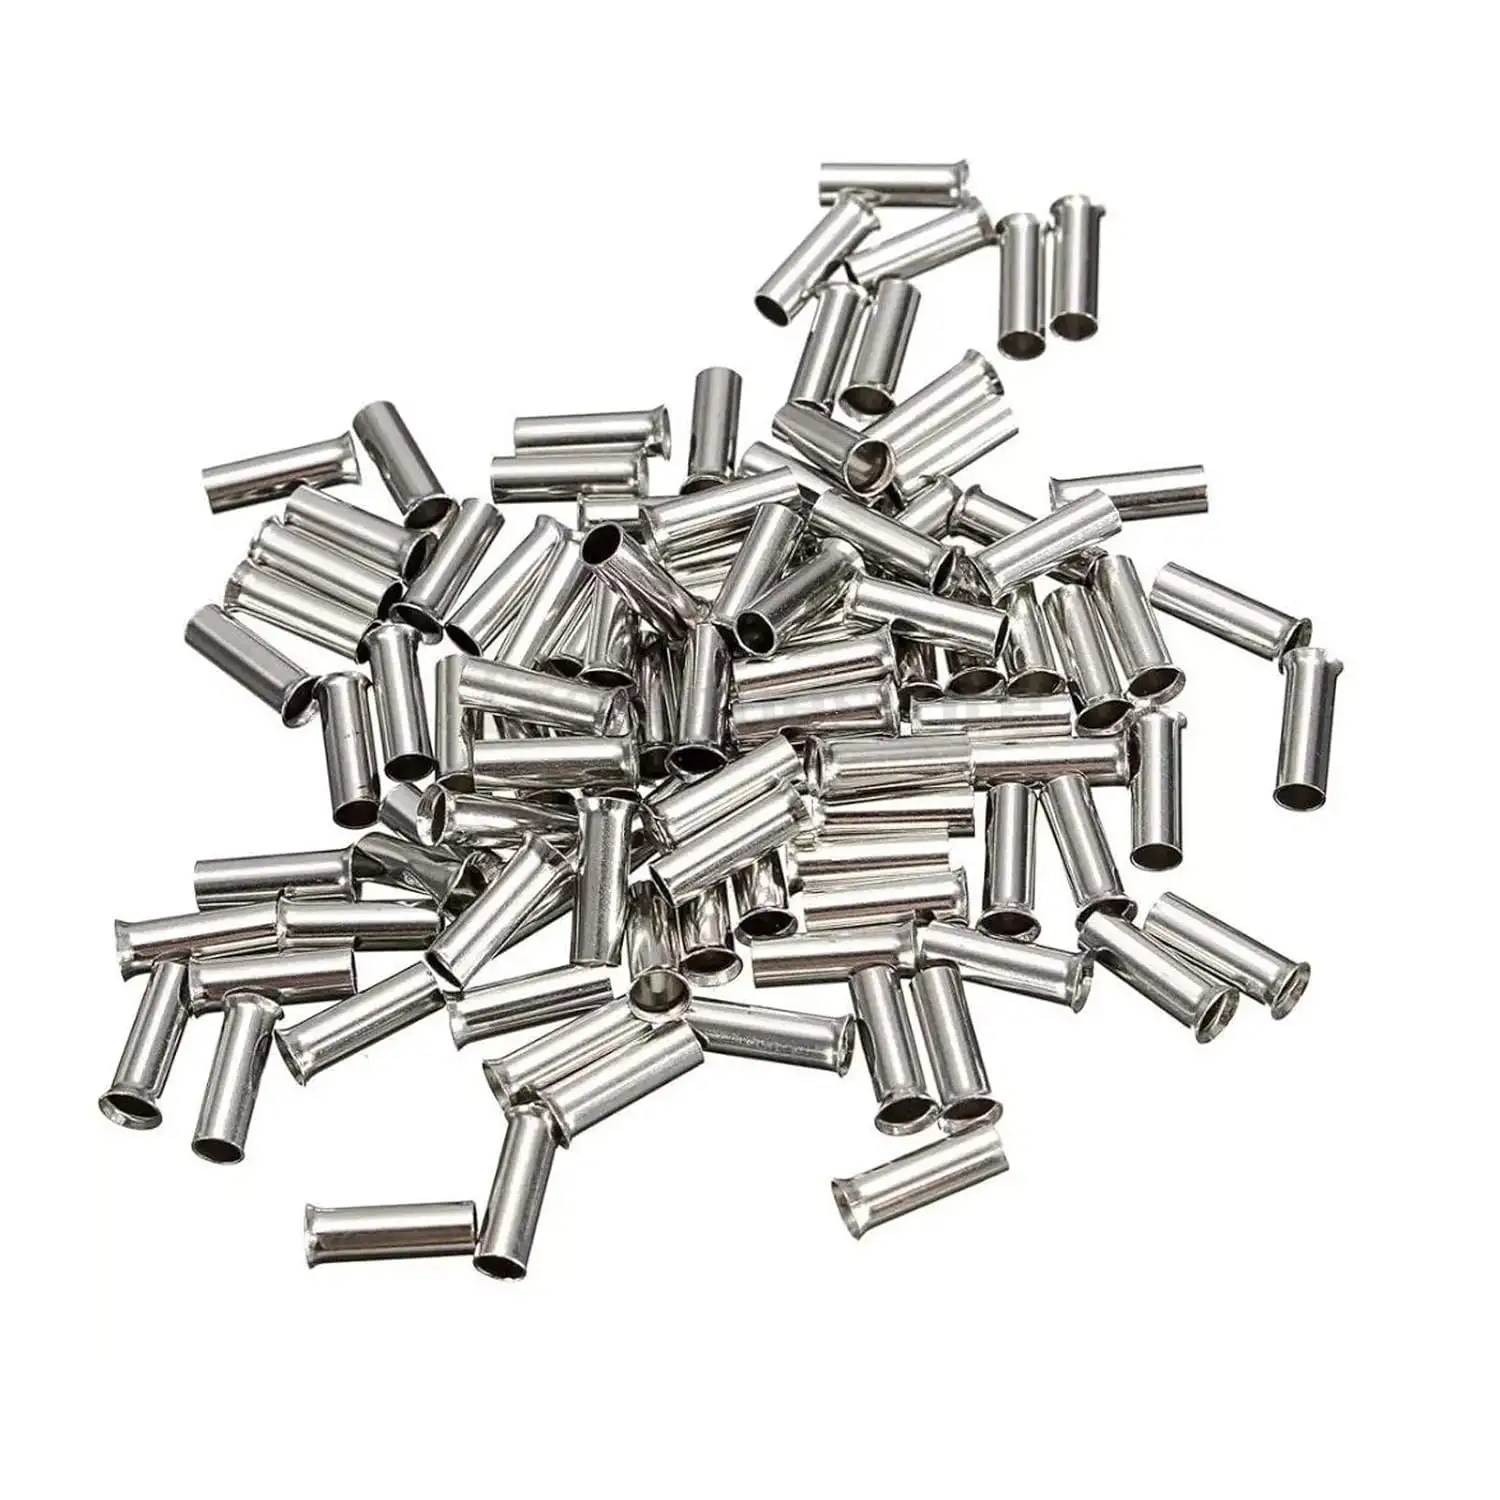 Tinned Copper Crimp Connectors Electrical Cable Pin Cord End Terminal Assortment Kit for Electric Connectors (EN 6012)